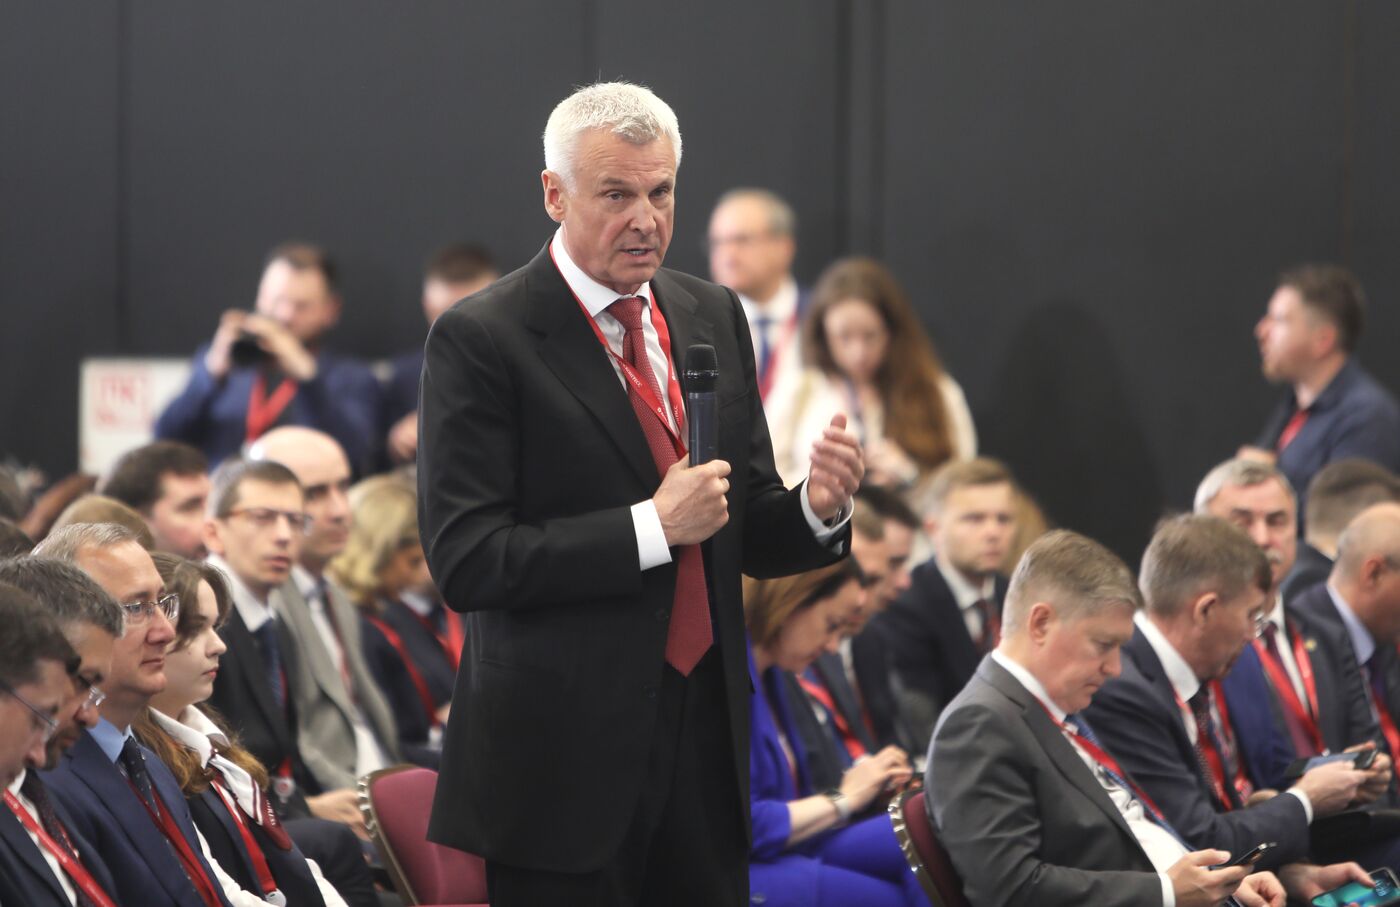 SPIEF-2023. Presenting the Results of the Russian Regional Investment Climate Index